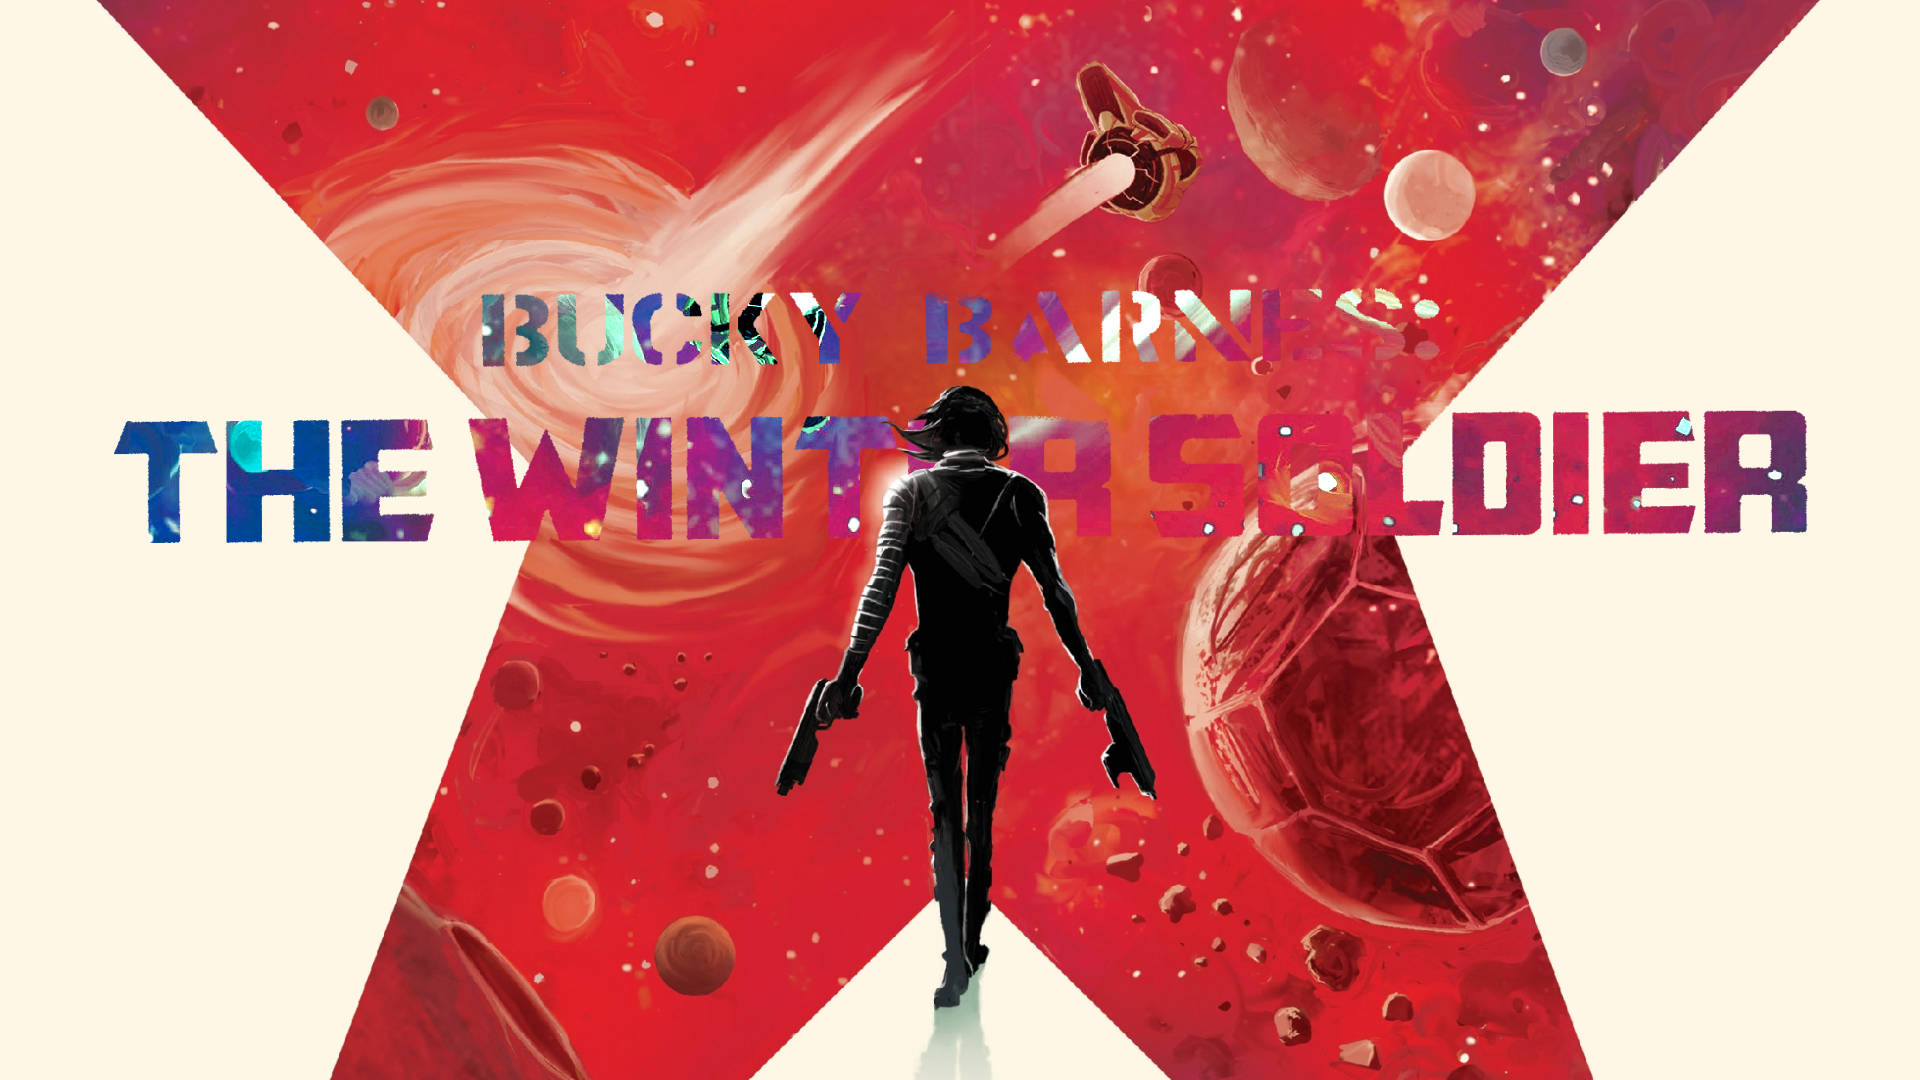 Bucky Barnes The Winter Soldier Poster Background